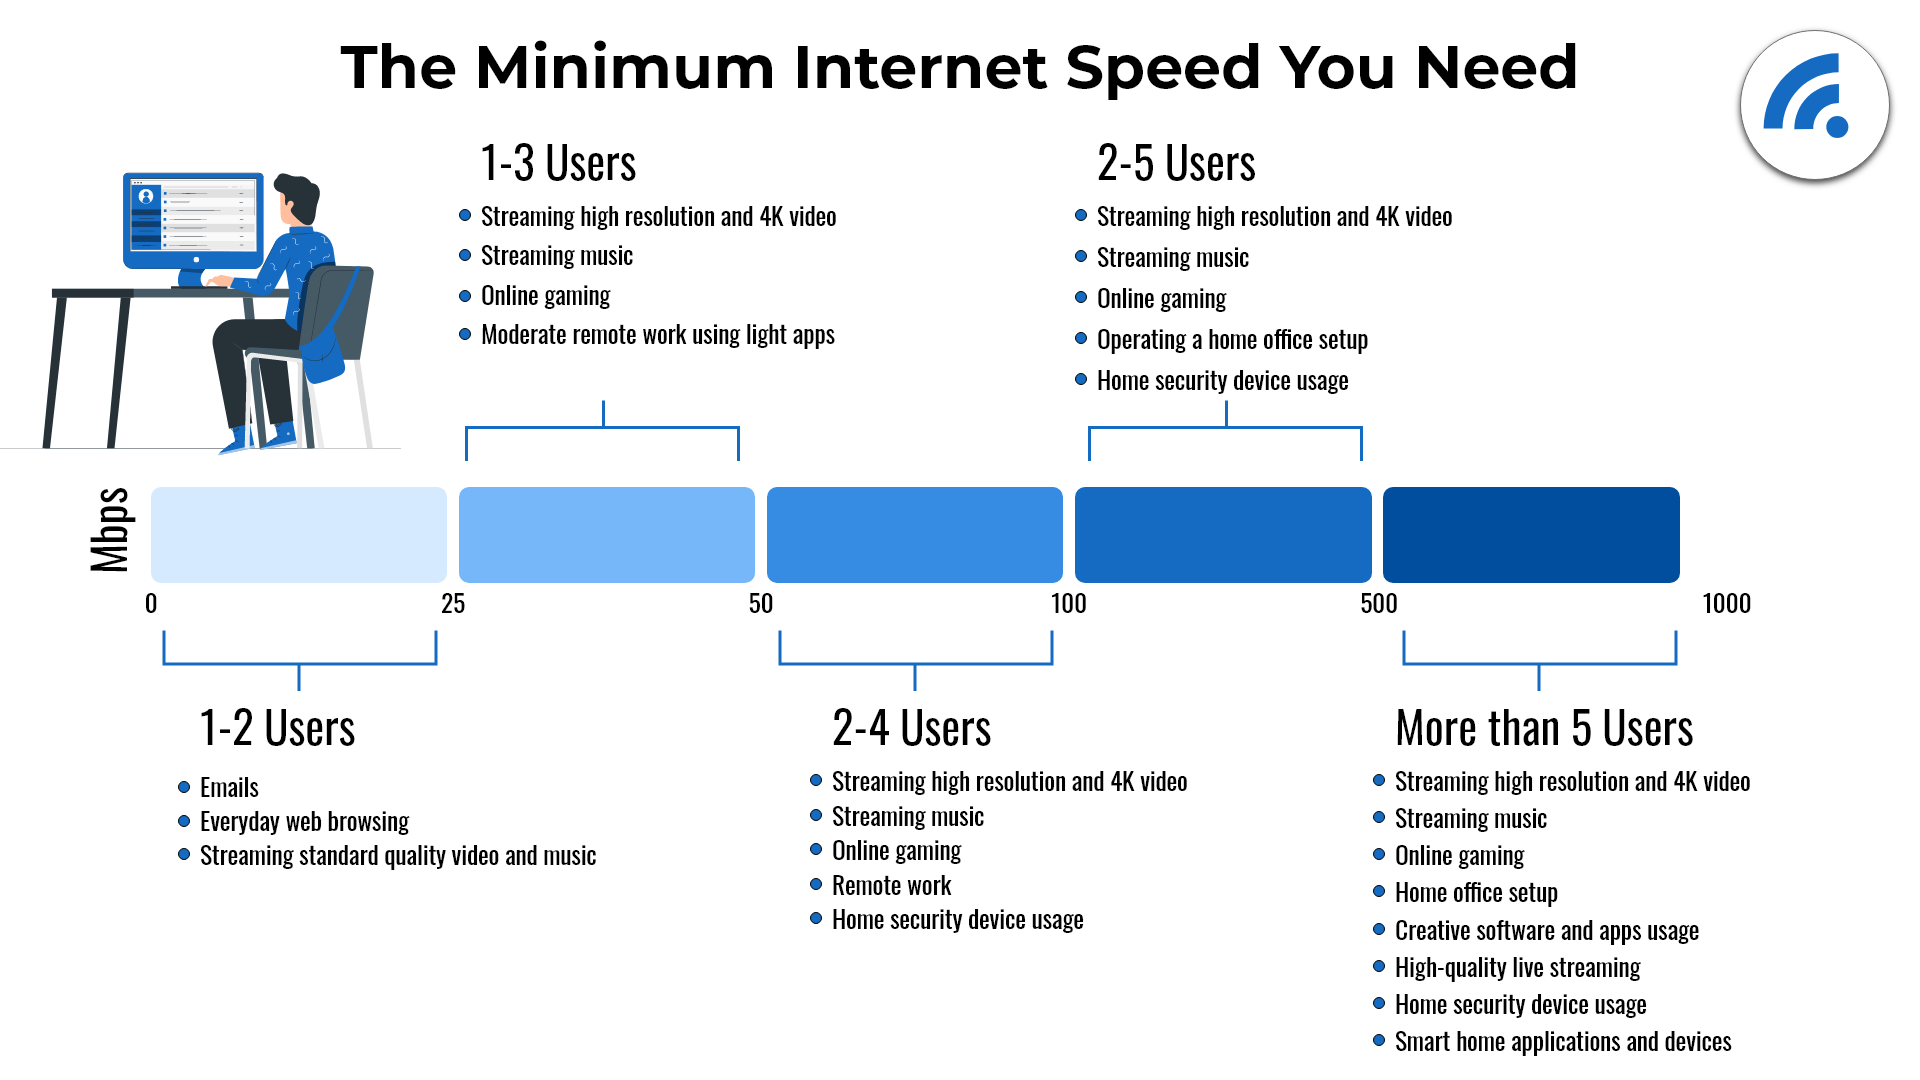 Minimum internet speed required for each activity based on the number of users